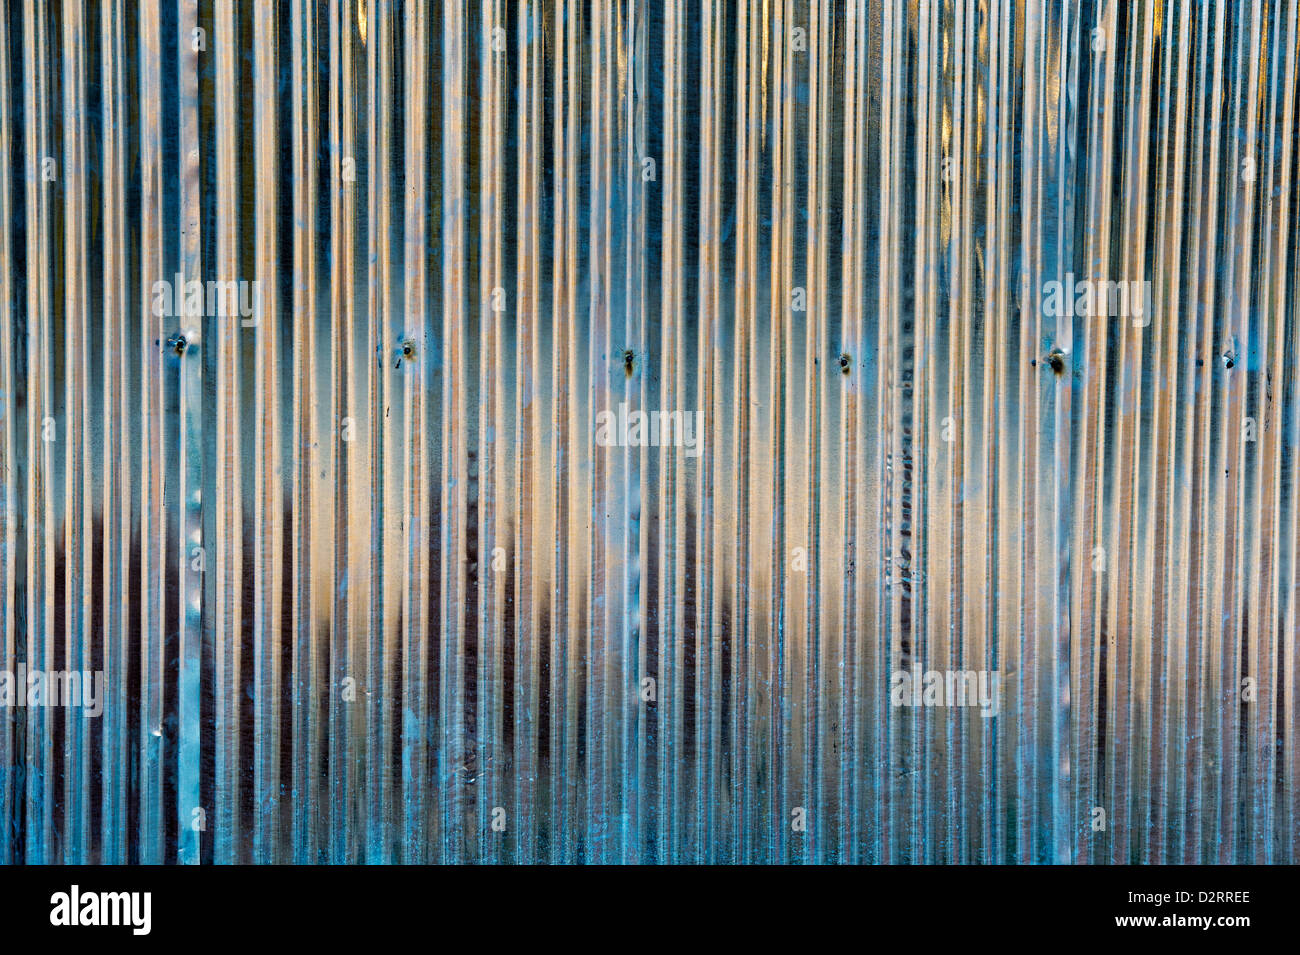 Corrugated metal roofing sheets abstract Stock Photo